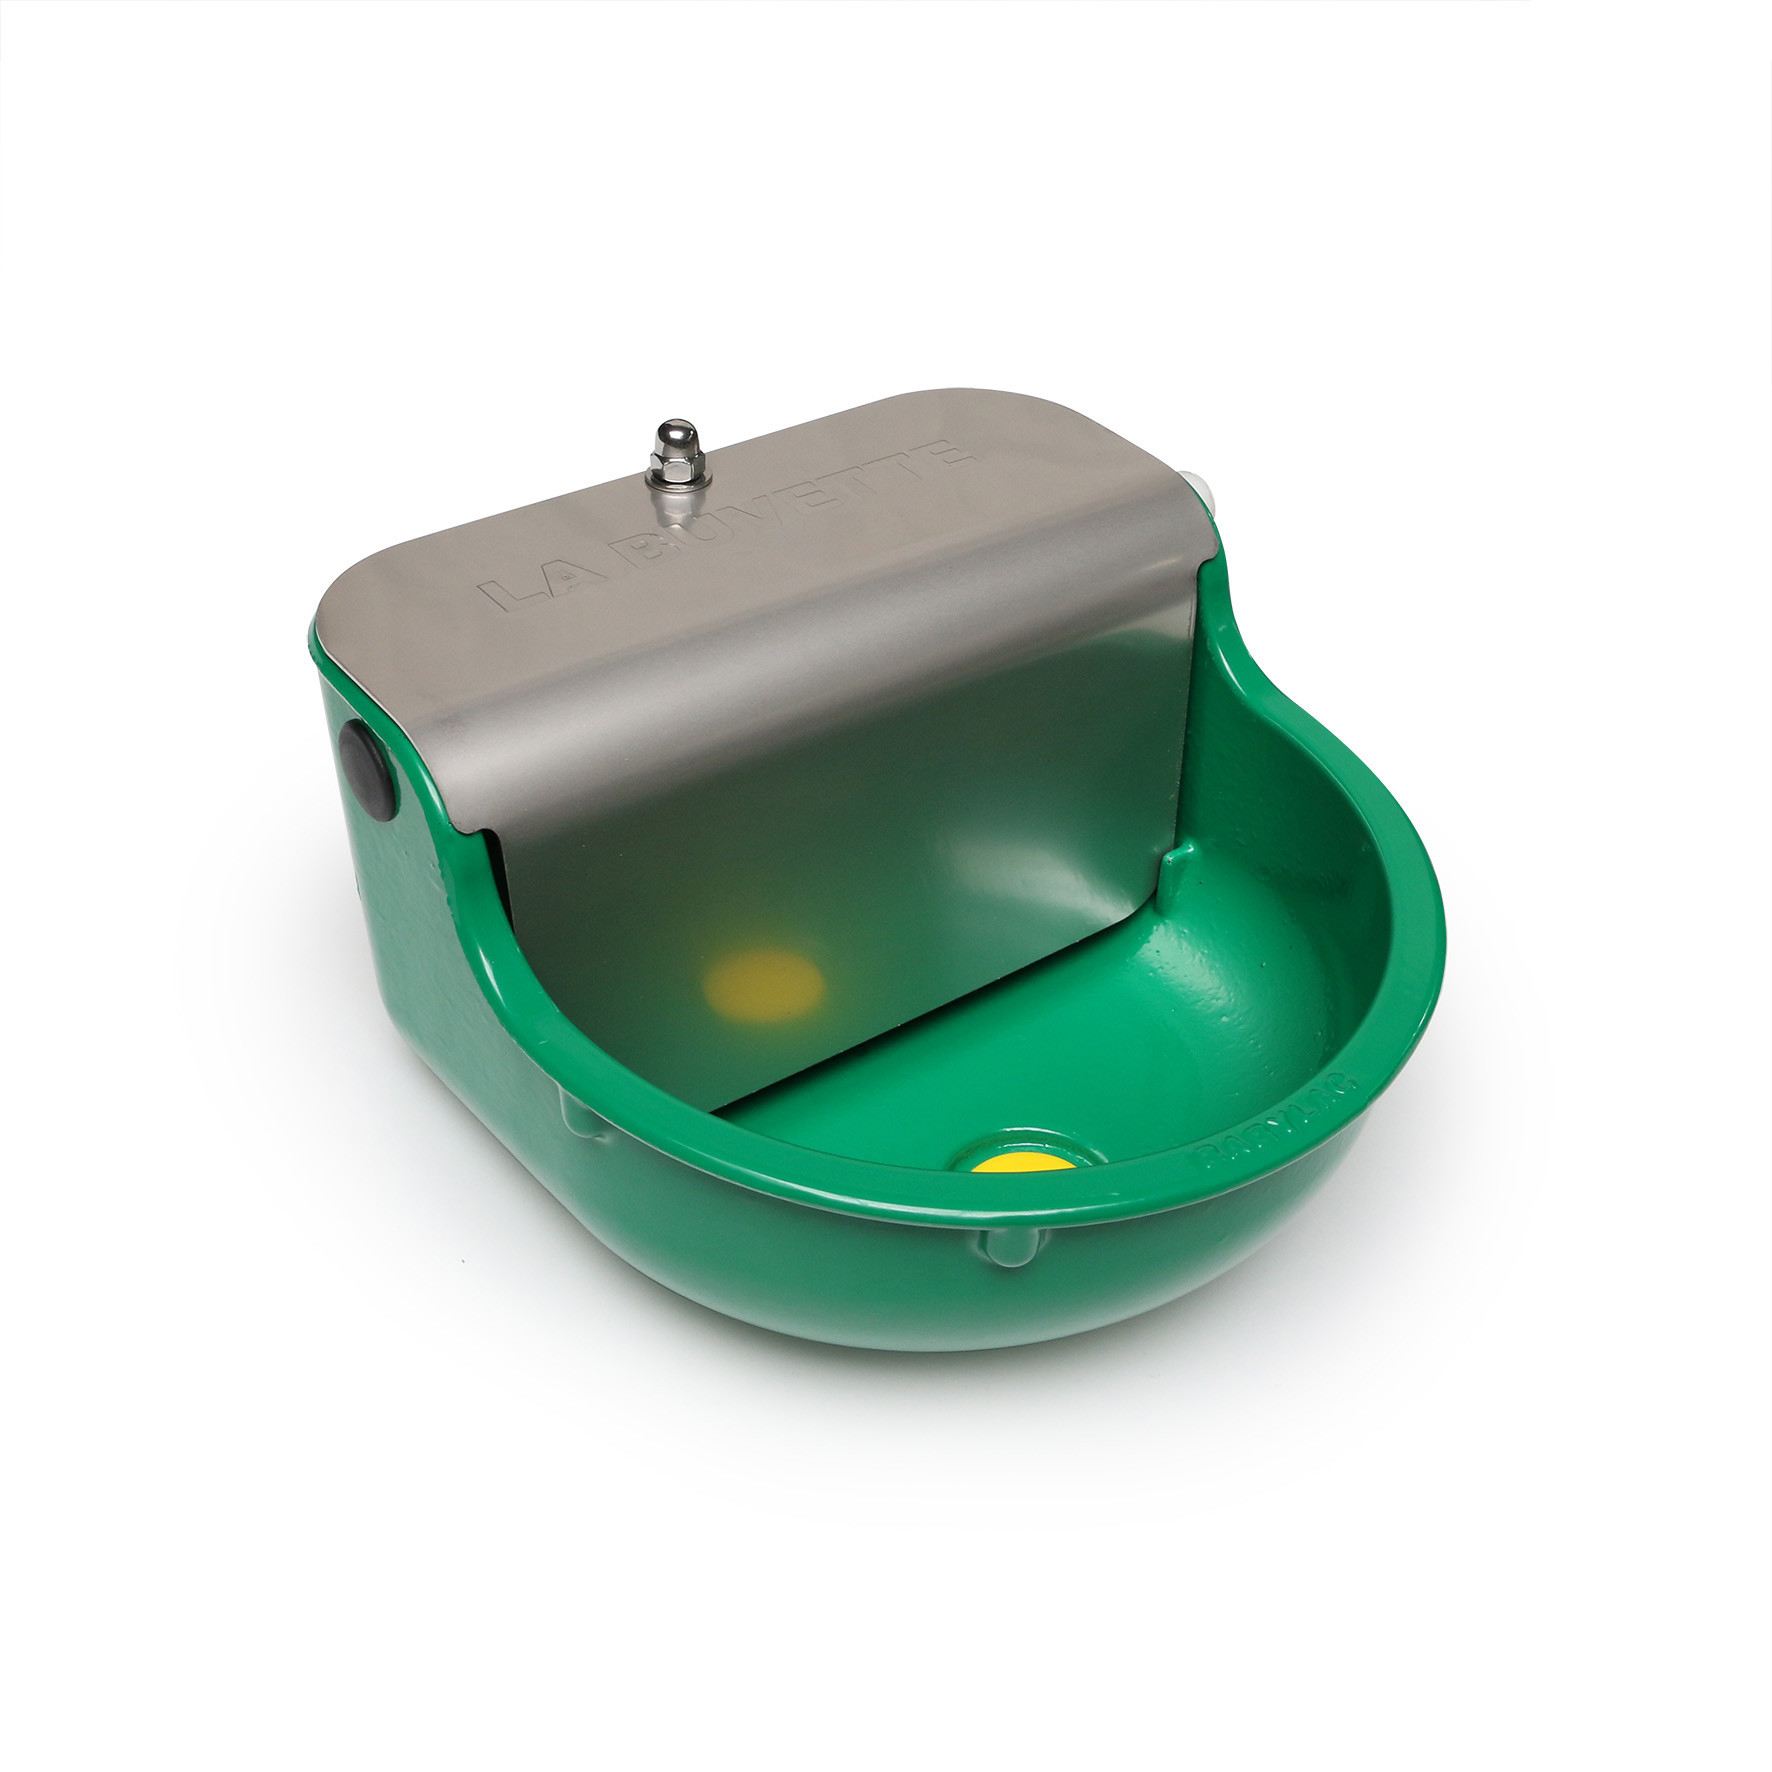  BABYLAC constant water drinking bowl ref. 2015